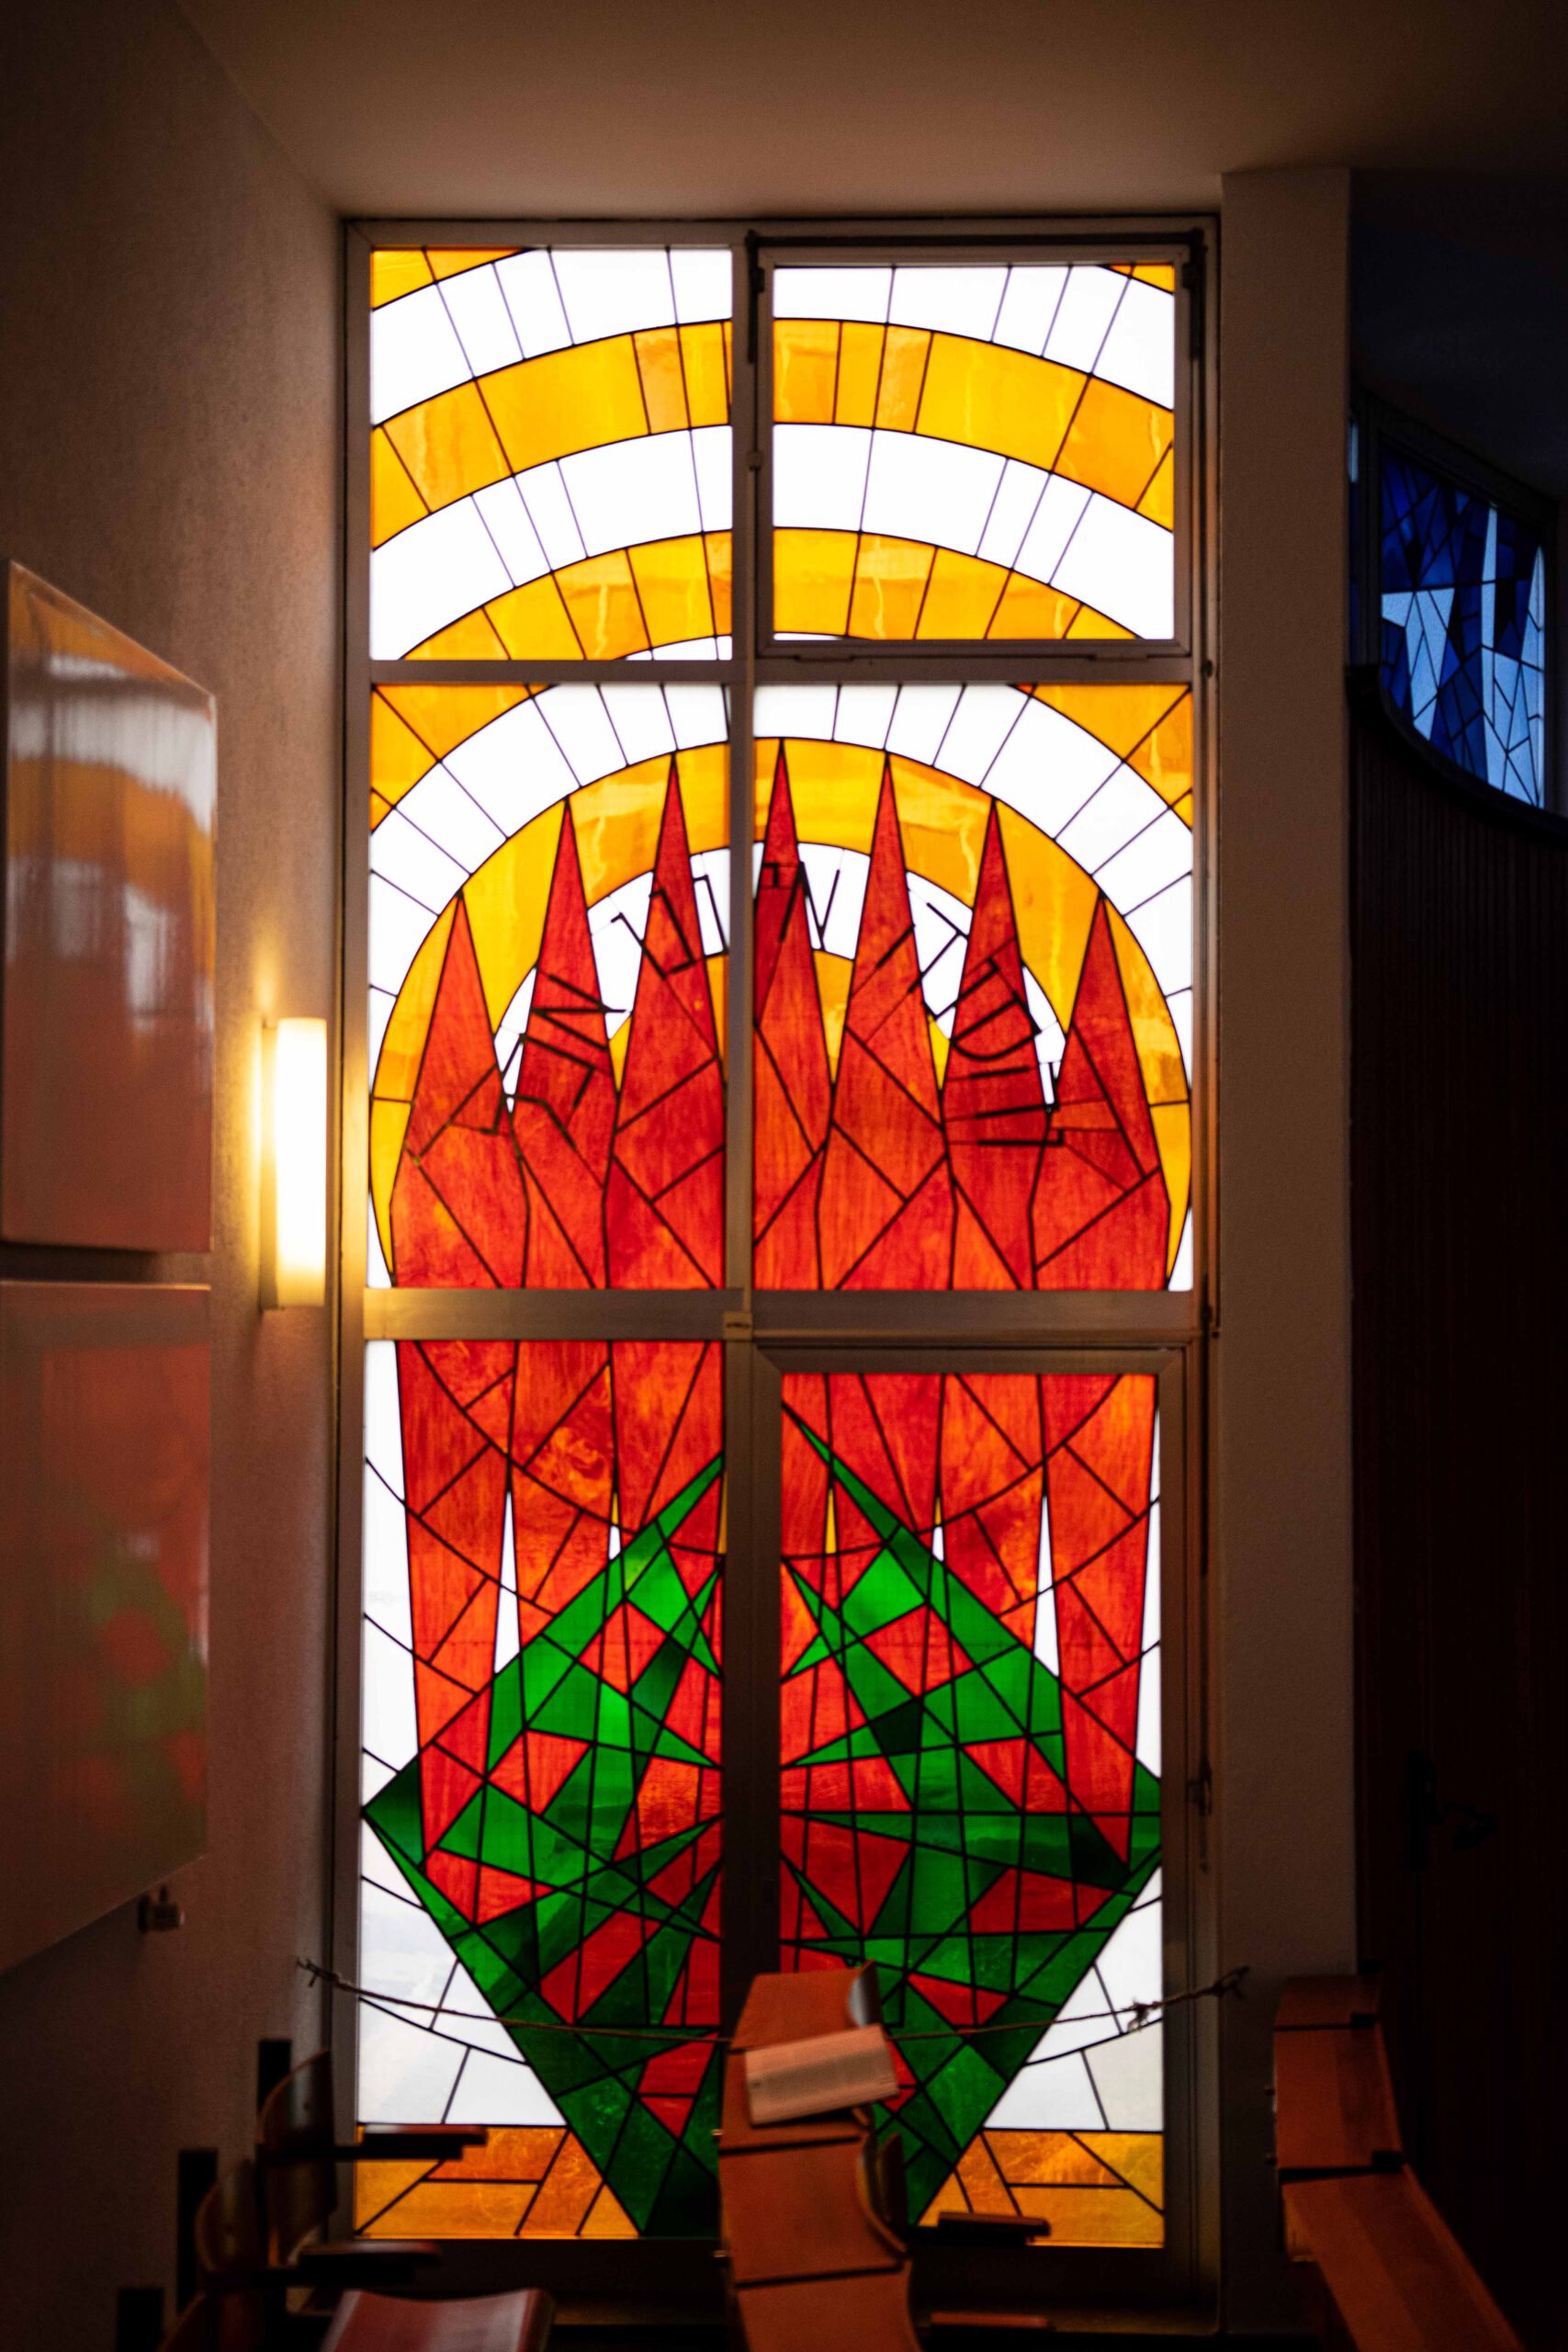 Window on the upper floor of the Wiesbaden synagogue. Photographer: Thomas Greiner